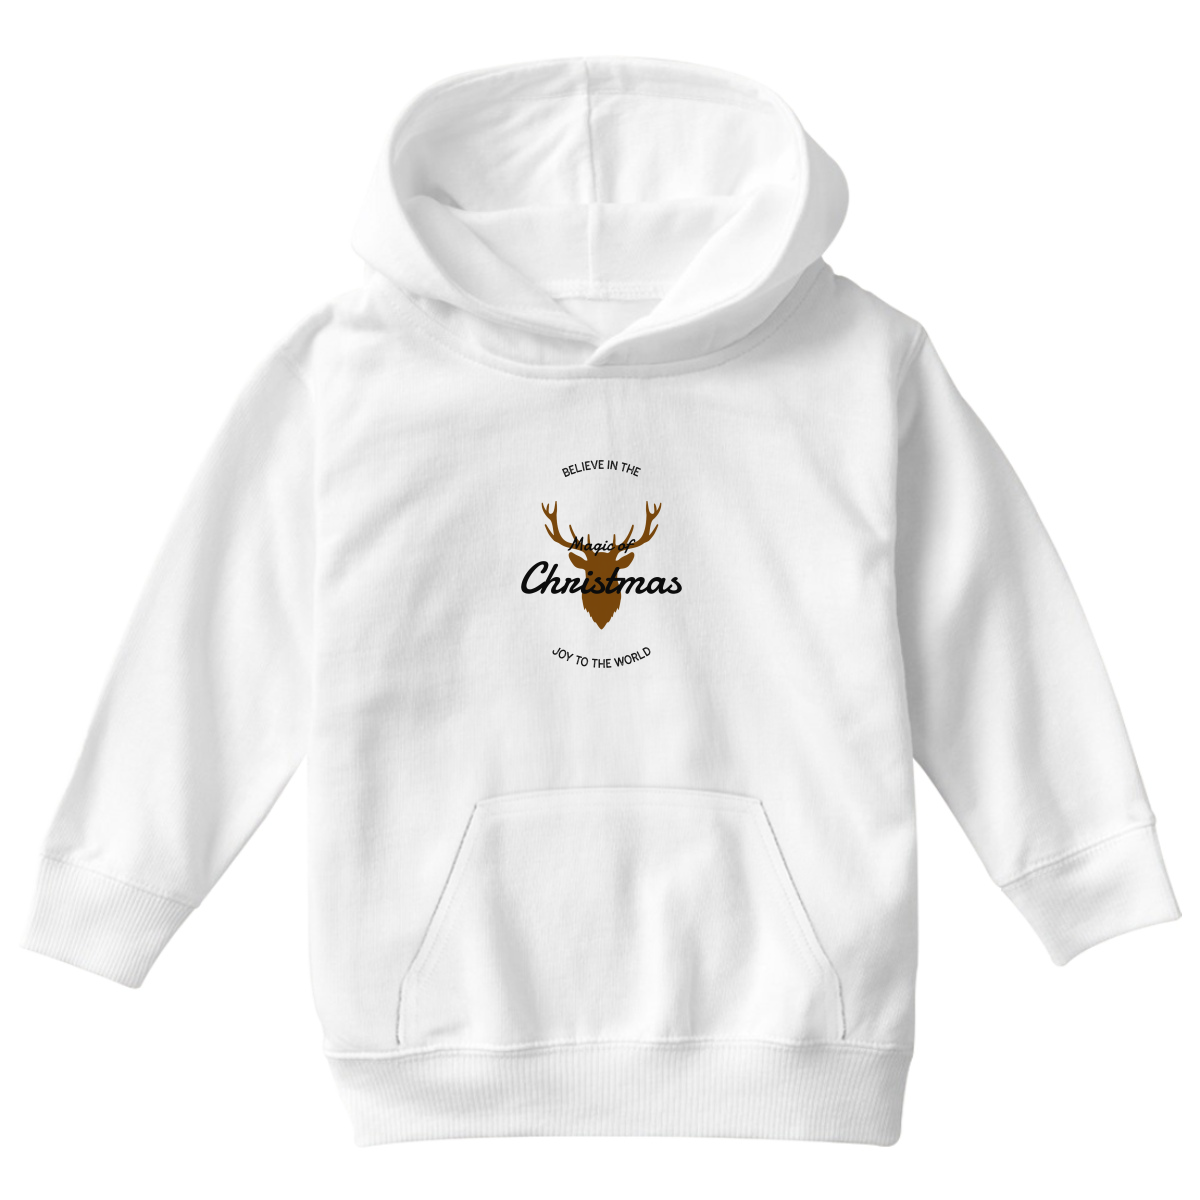 Believe in the Magic of Christmas Joy to the World Kids Hoodie | White